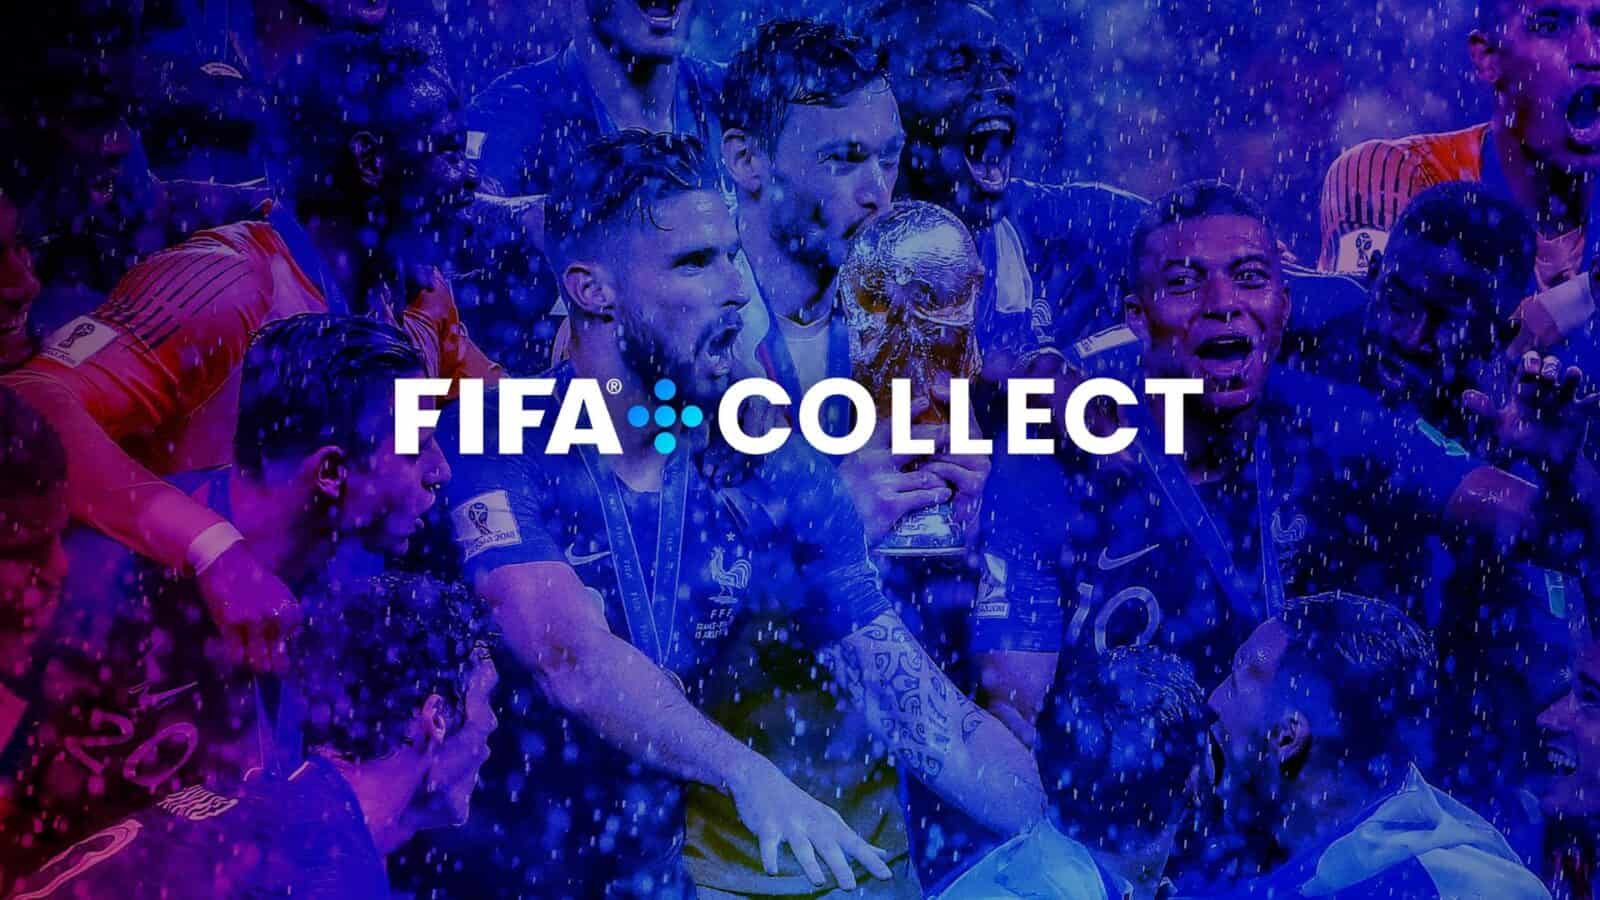 Modex Announces Second NFT Drop with FIFA+ Collect after Debut Sellout in 3 Hours.